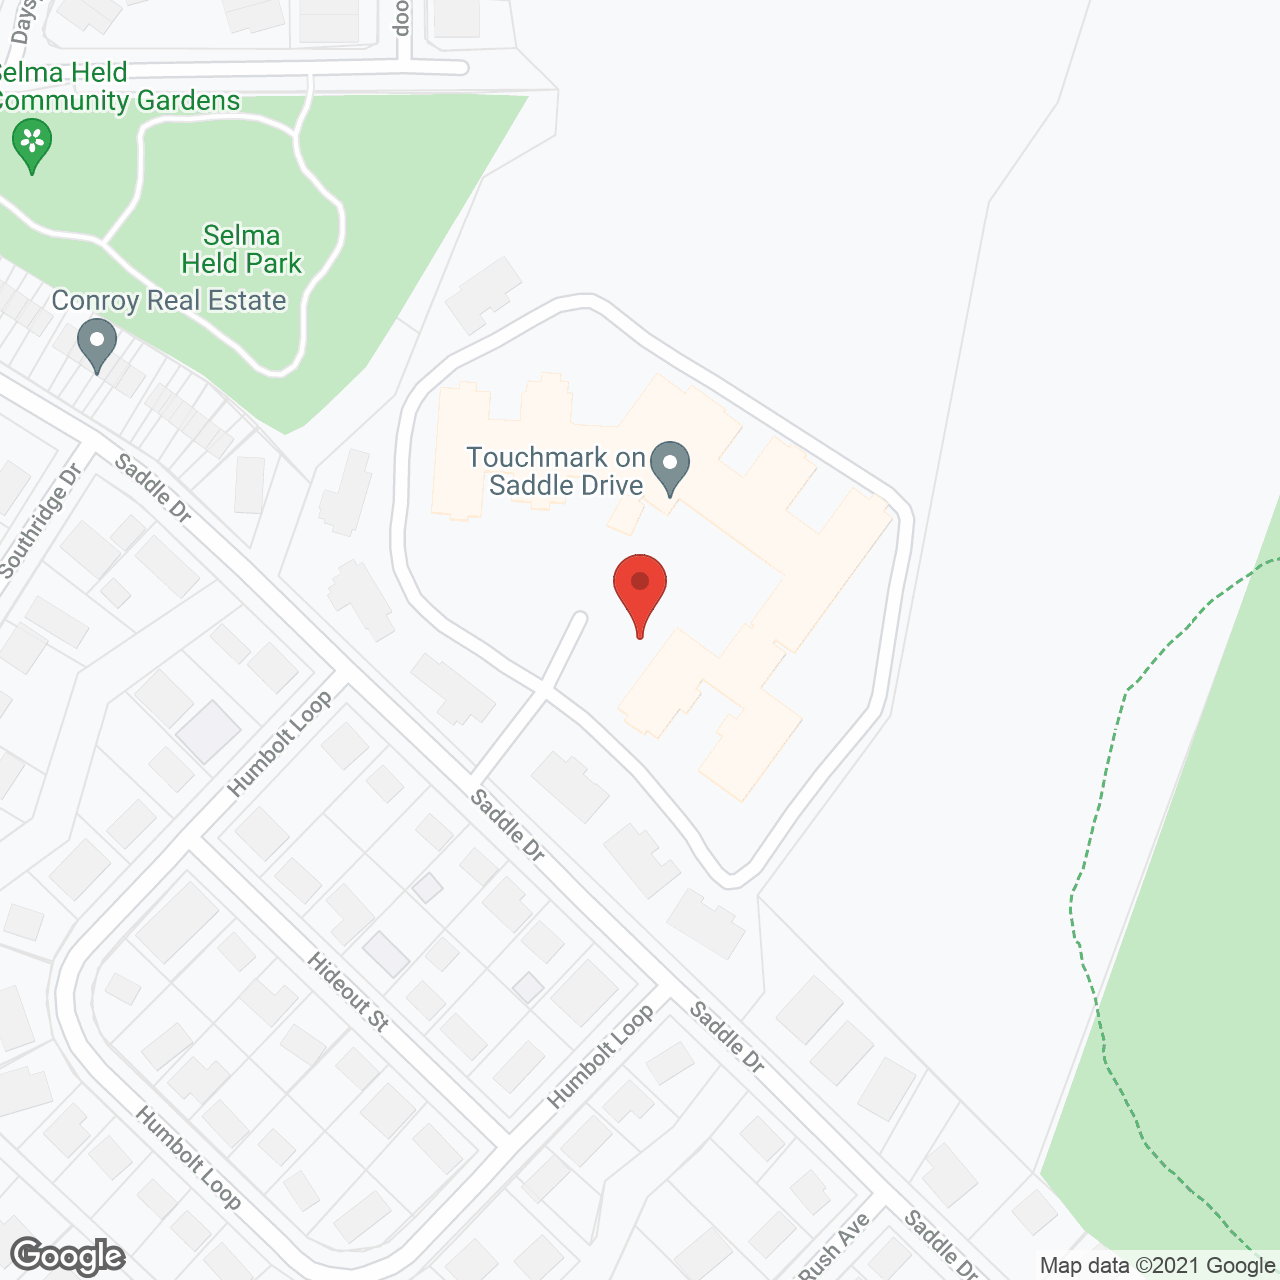 Touchmark on Saddle Drive in google map